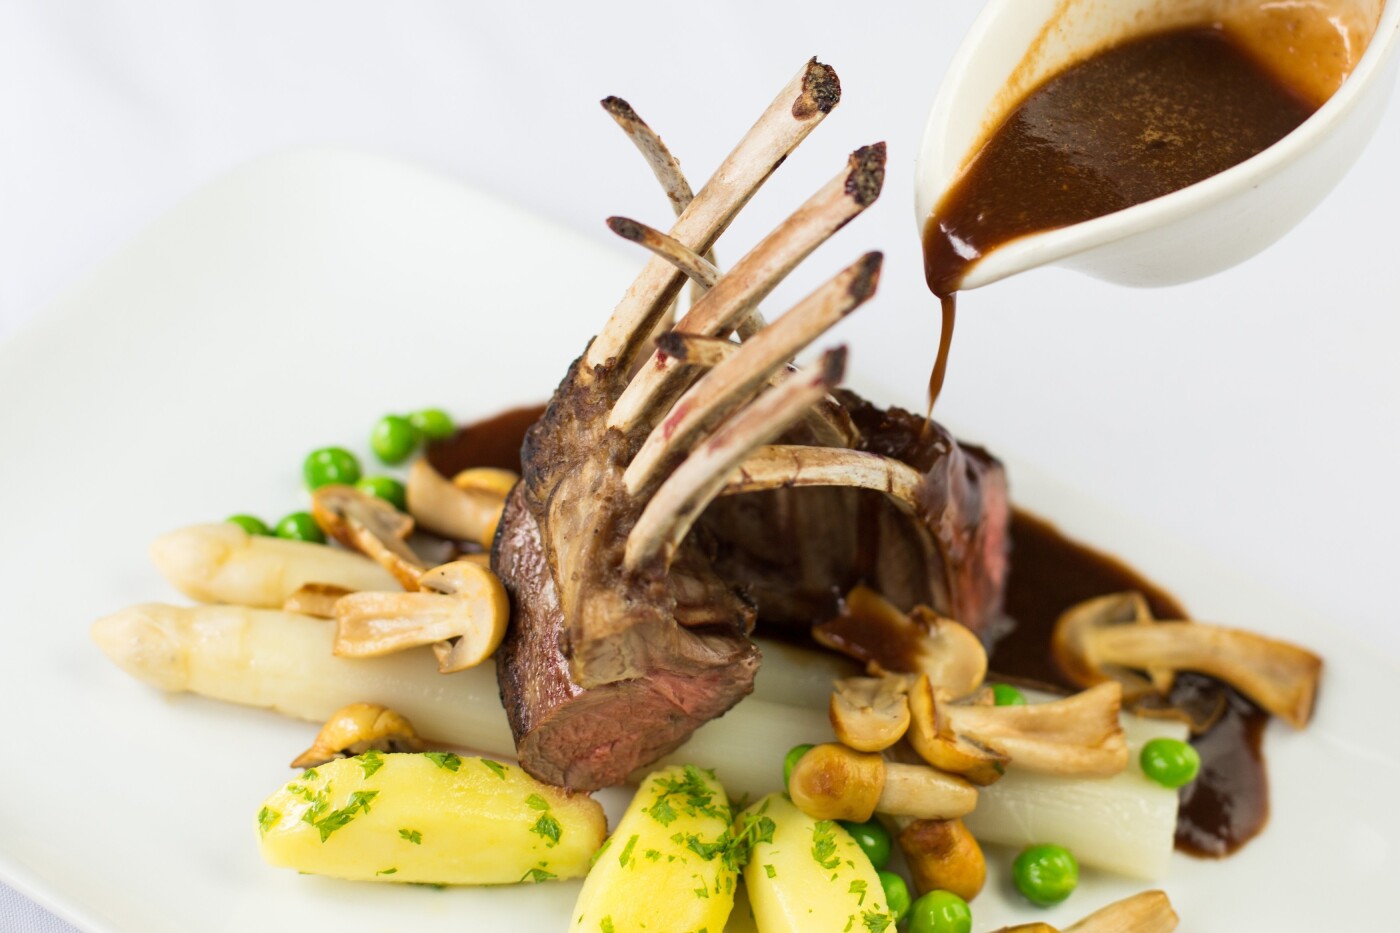 This photo is taken at Restaurant Vuur in Baarn, the Netherlands. The beautiful lambs rack with asparagus really stands out on the white background. Pouring the sauce over it gives the image just that extra dimension.